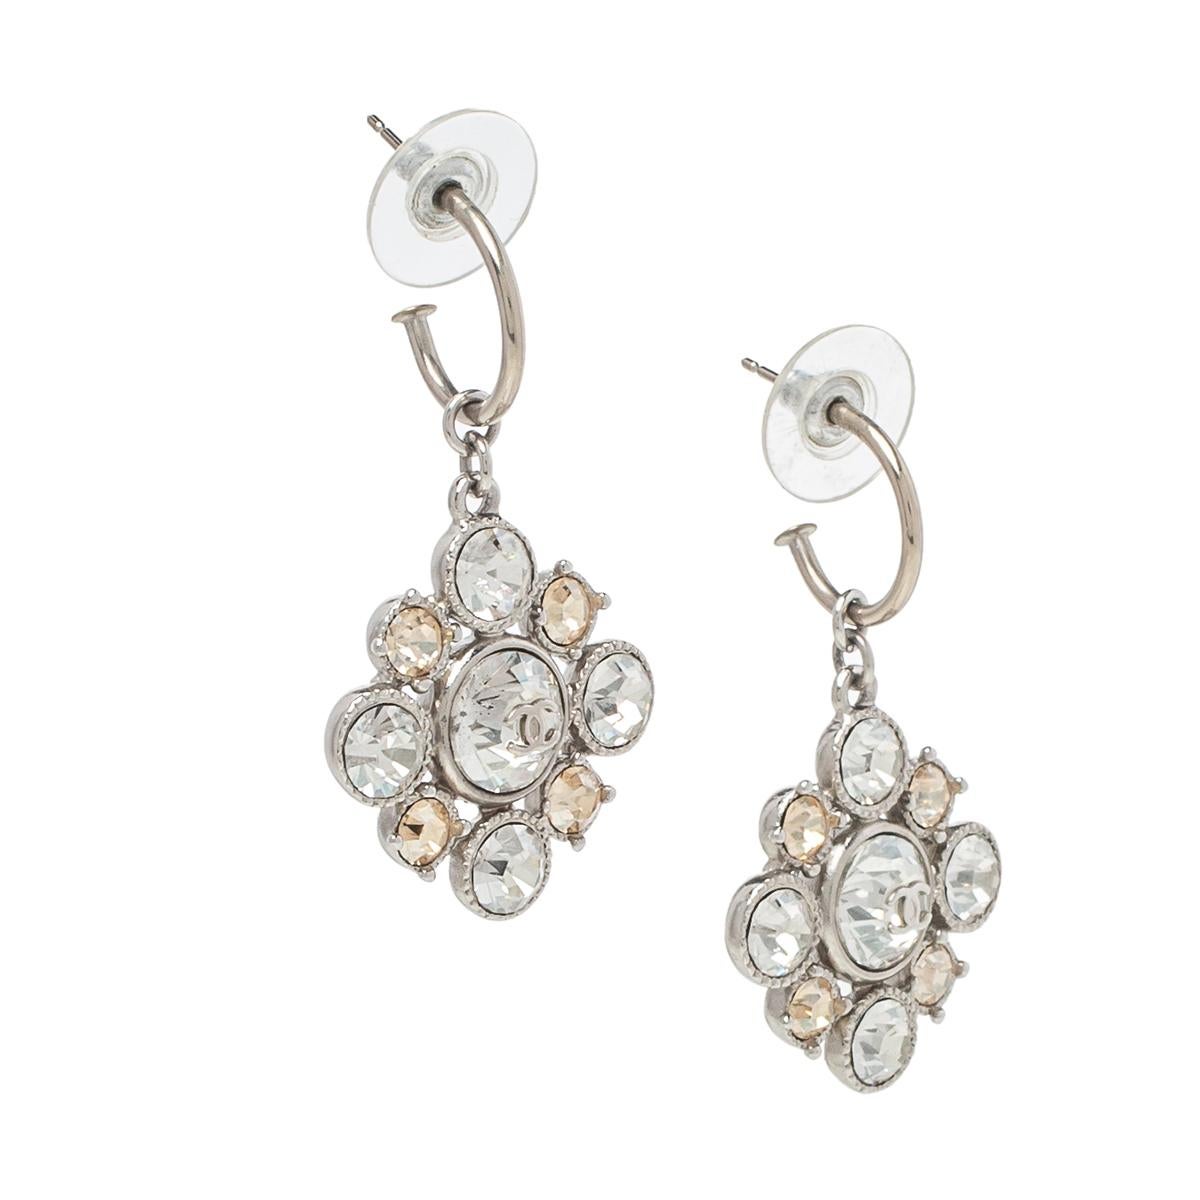 These earrings from Chanel are so pretty, you'll love flaunting them for your most special outings! Crafted from silver-tone metal, these hoop earrings have a floral-shaped drop that is beautifully embellished with crystals along with the iconic CC